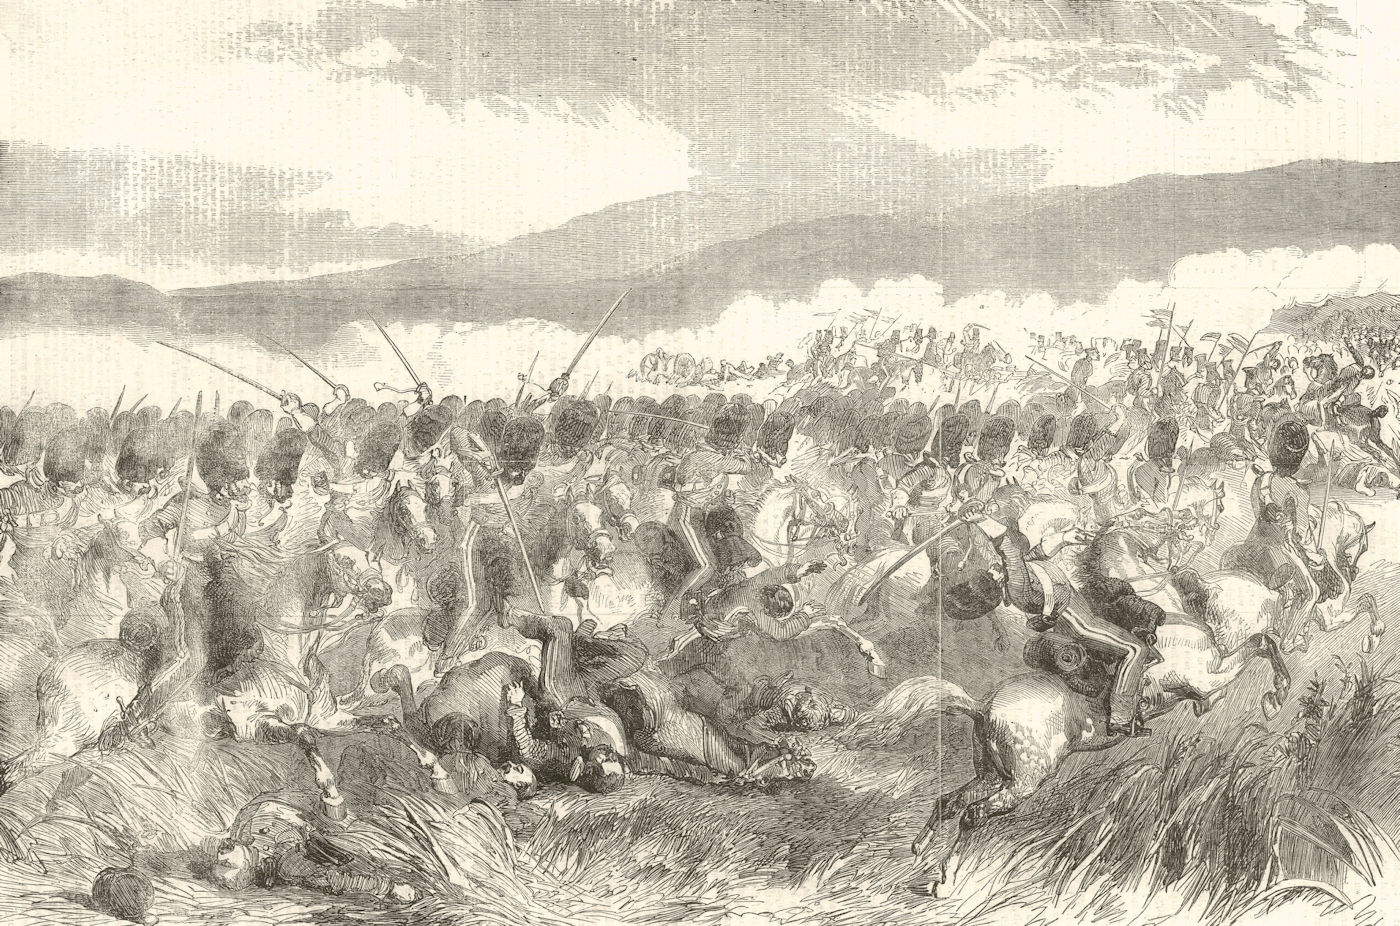 Associate Product Action at Balaklava. Charge of the Scots Greys, October 25. Crimean War 1854